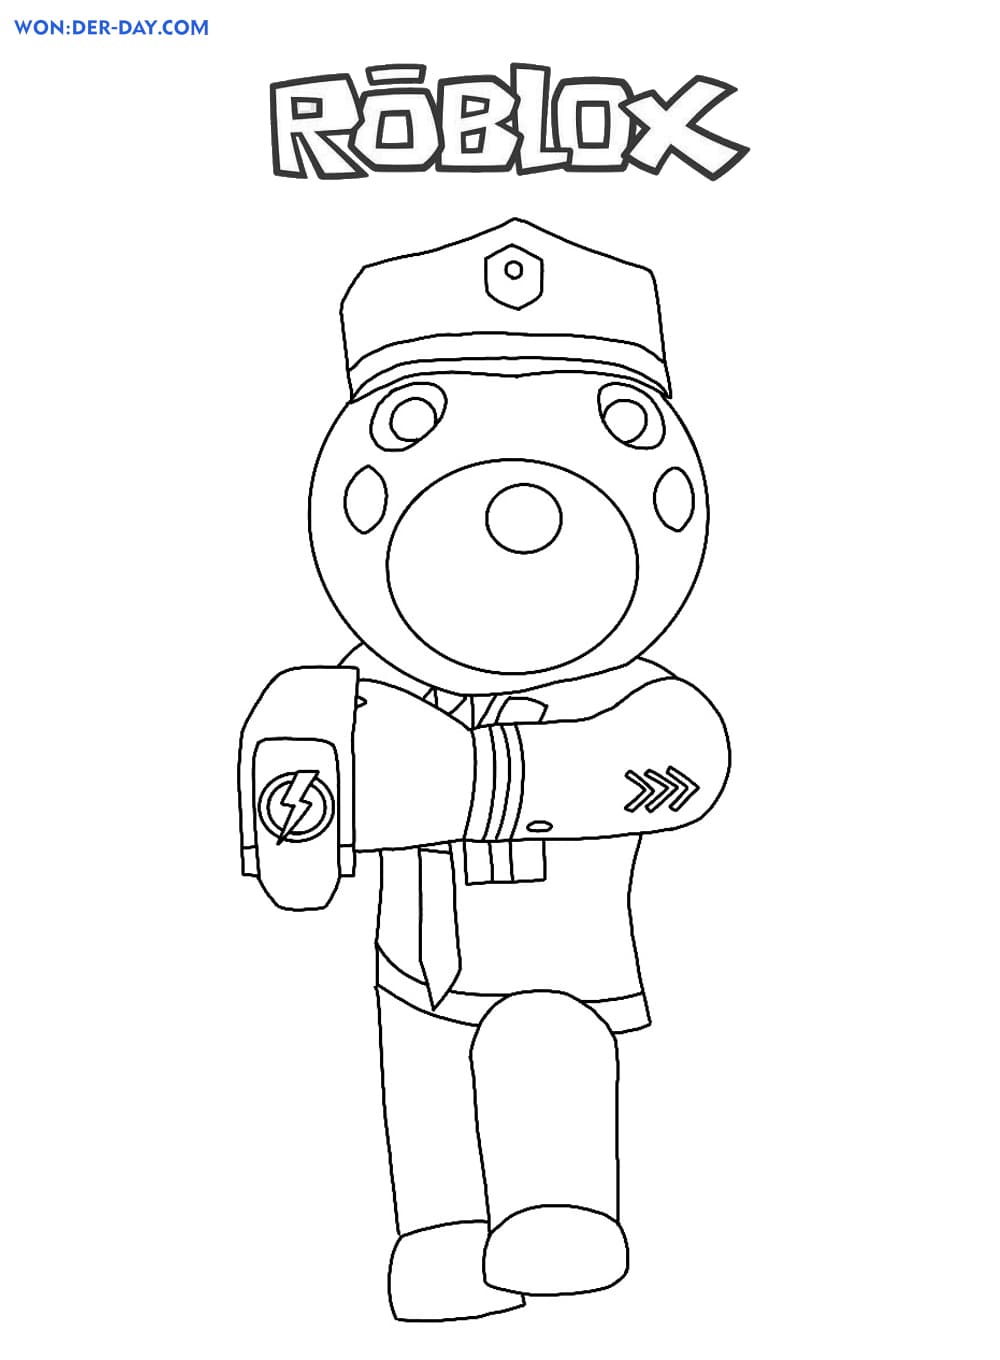 Piggy Roblox coloring sheet - Coloring pages 🎨